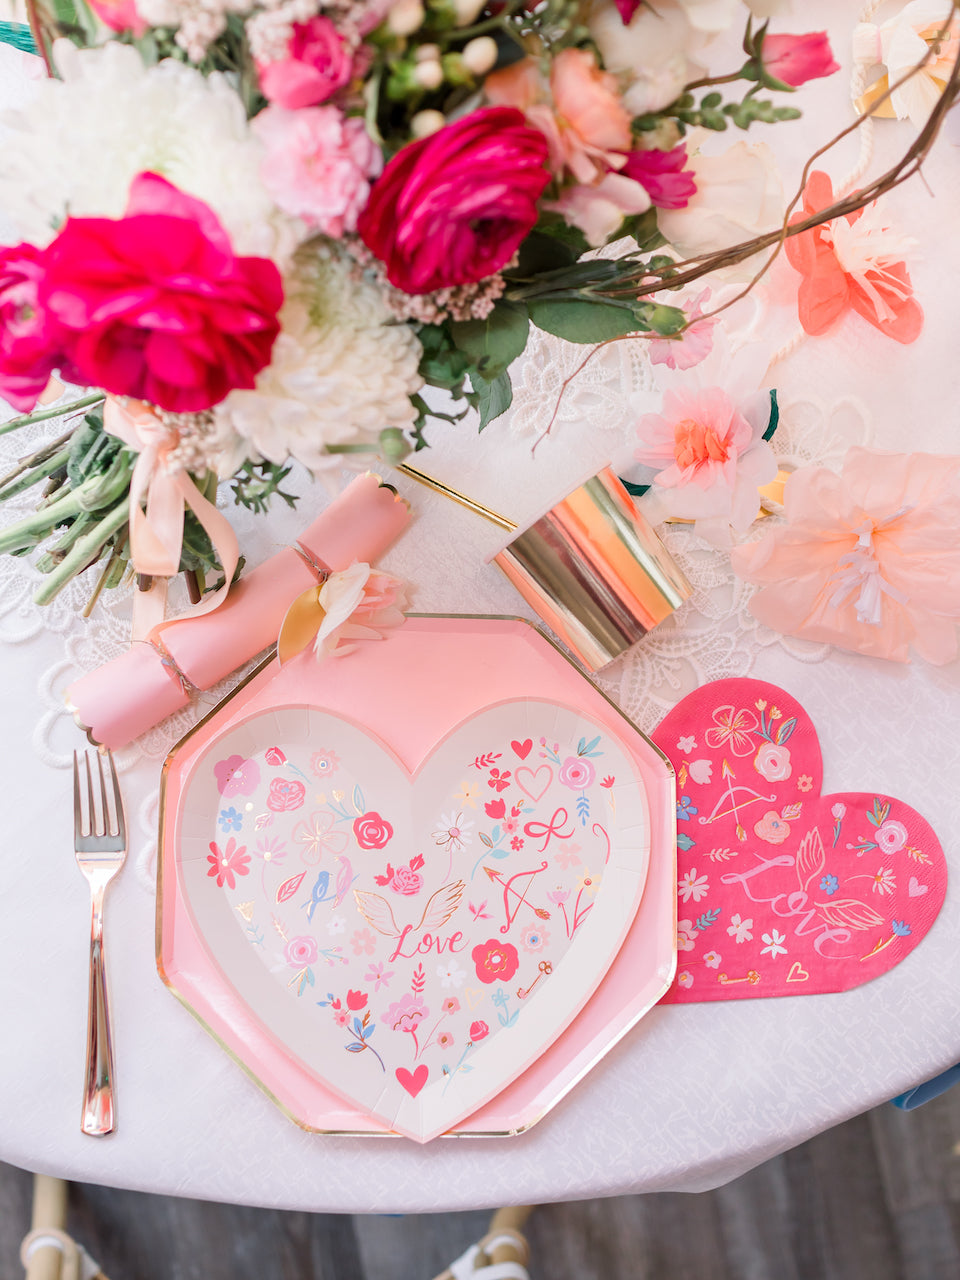 Heart shaped plates and pink party supplies set up at a Valentine's Day party